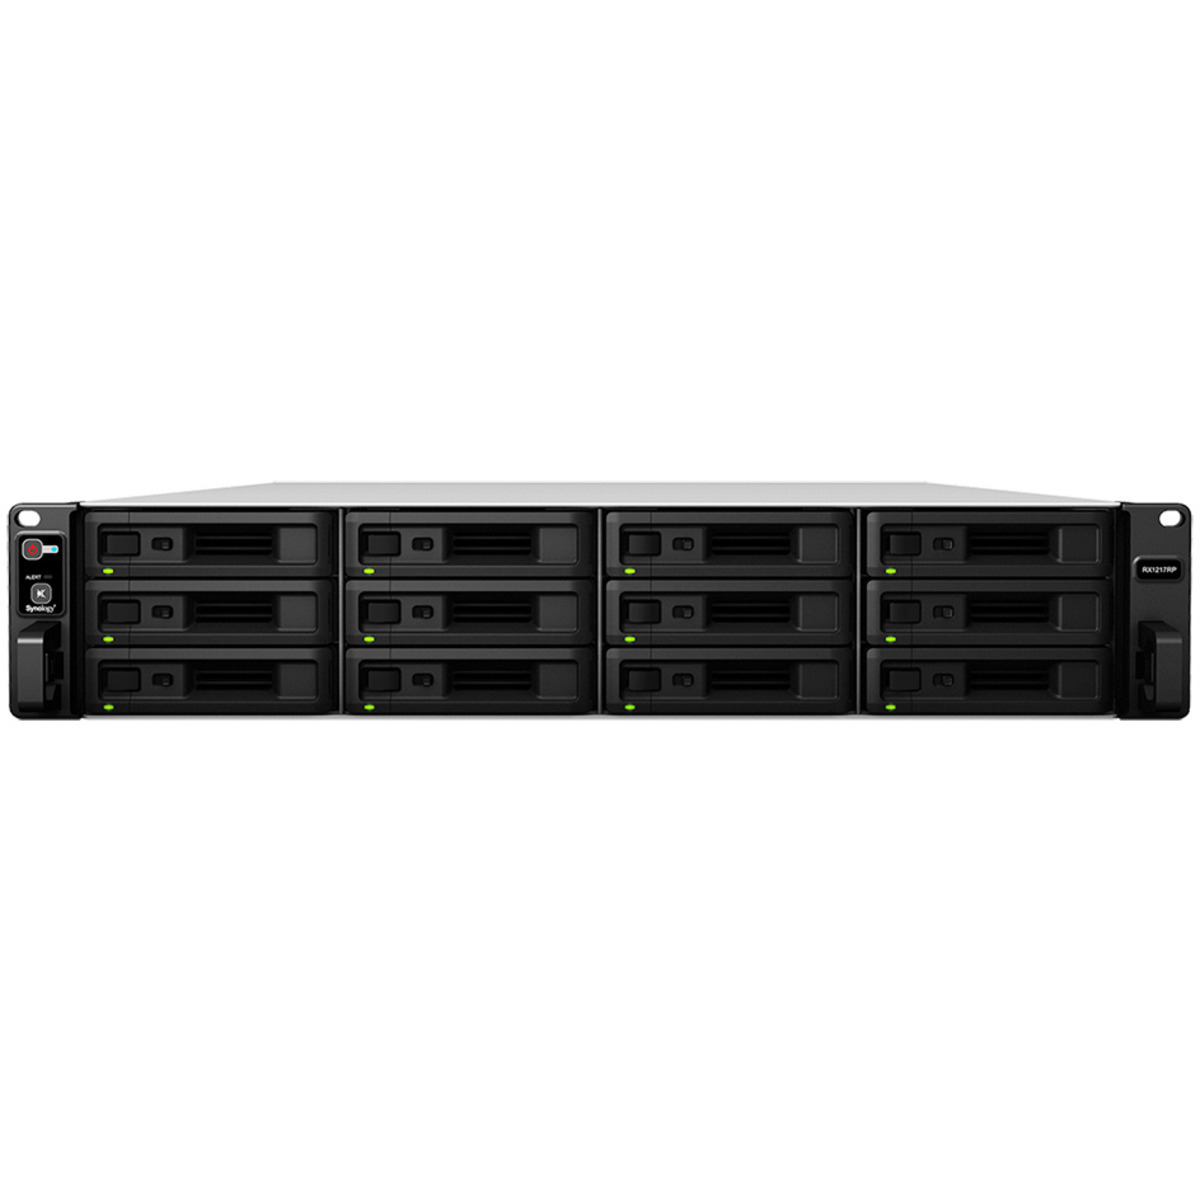 buy $4216 Synology RX1217RP 72tb RackMount Expansion Enclosure 12x6000gb Western Digital Blue WD60EZAZ 3.5 5400rpm SATA 6Gb/s HDD CONSUMER Class Drives Installed - Burn-In Tested - nas headquarters buy network attached storage server device das new raid-5 free shipping usa christmas new year holiday sale RX1217RP